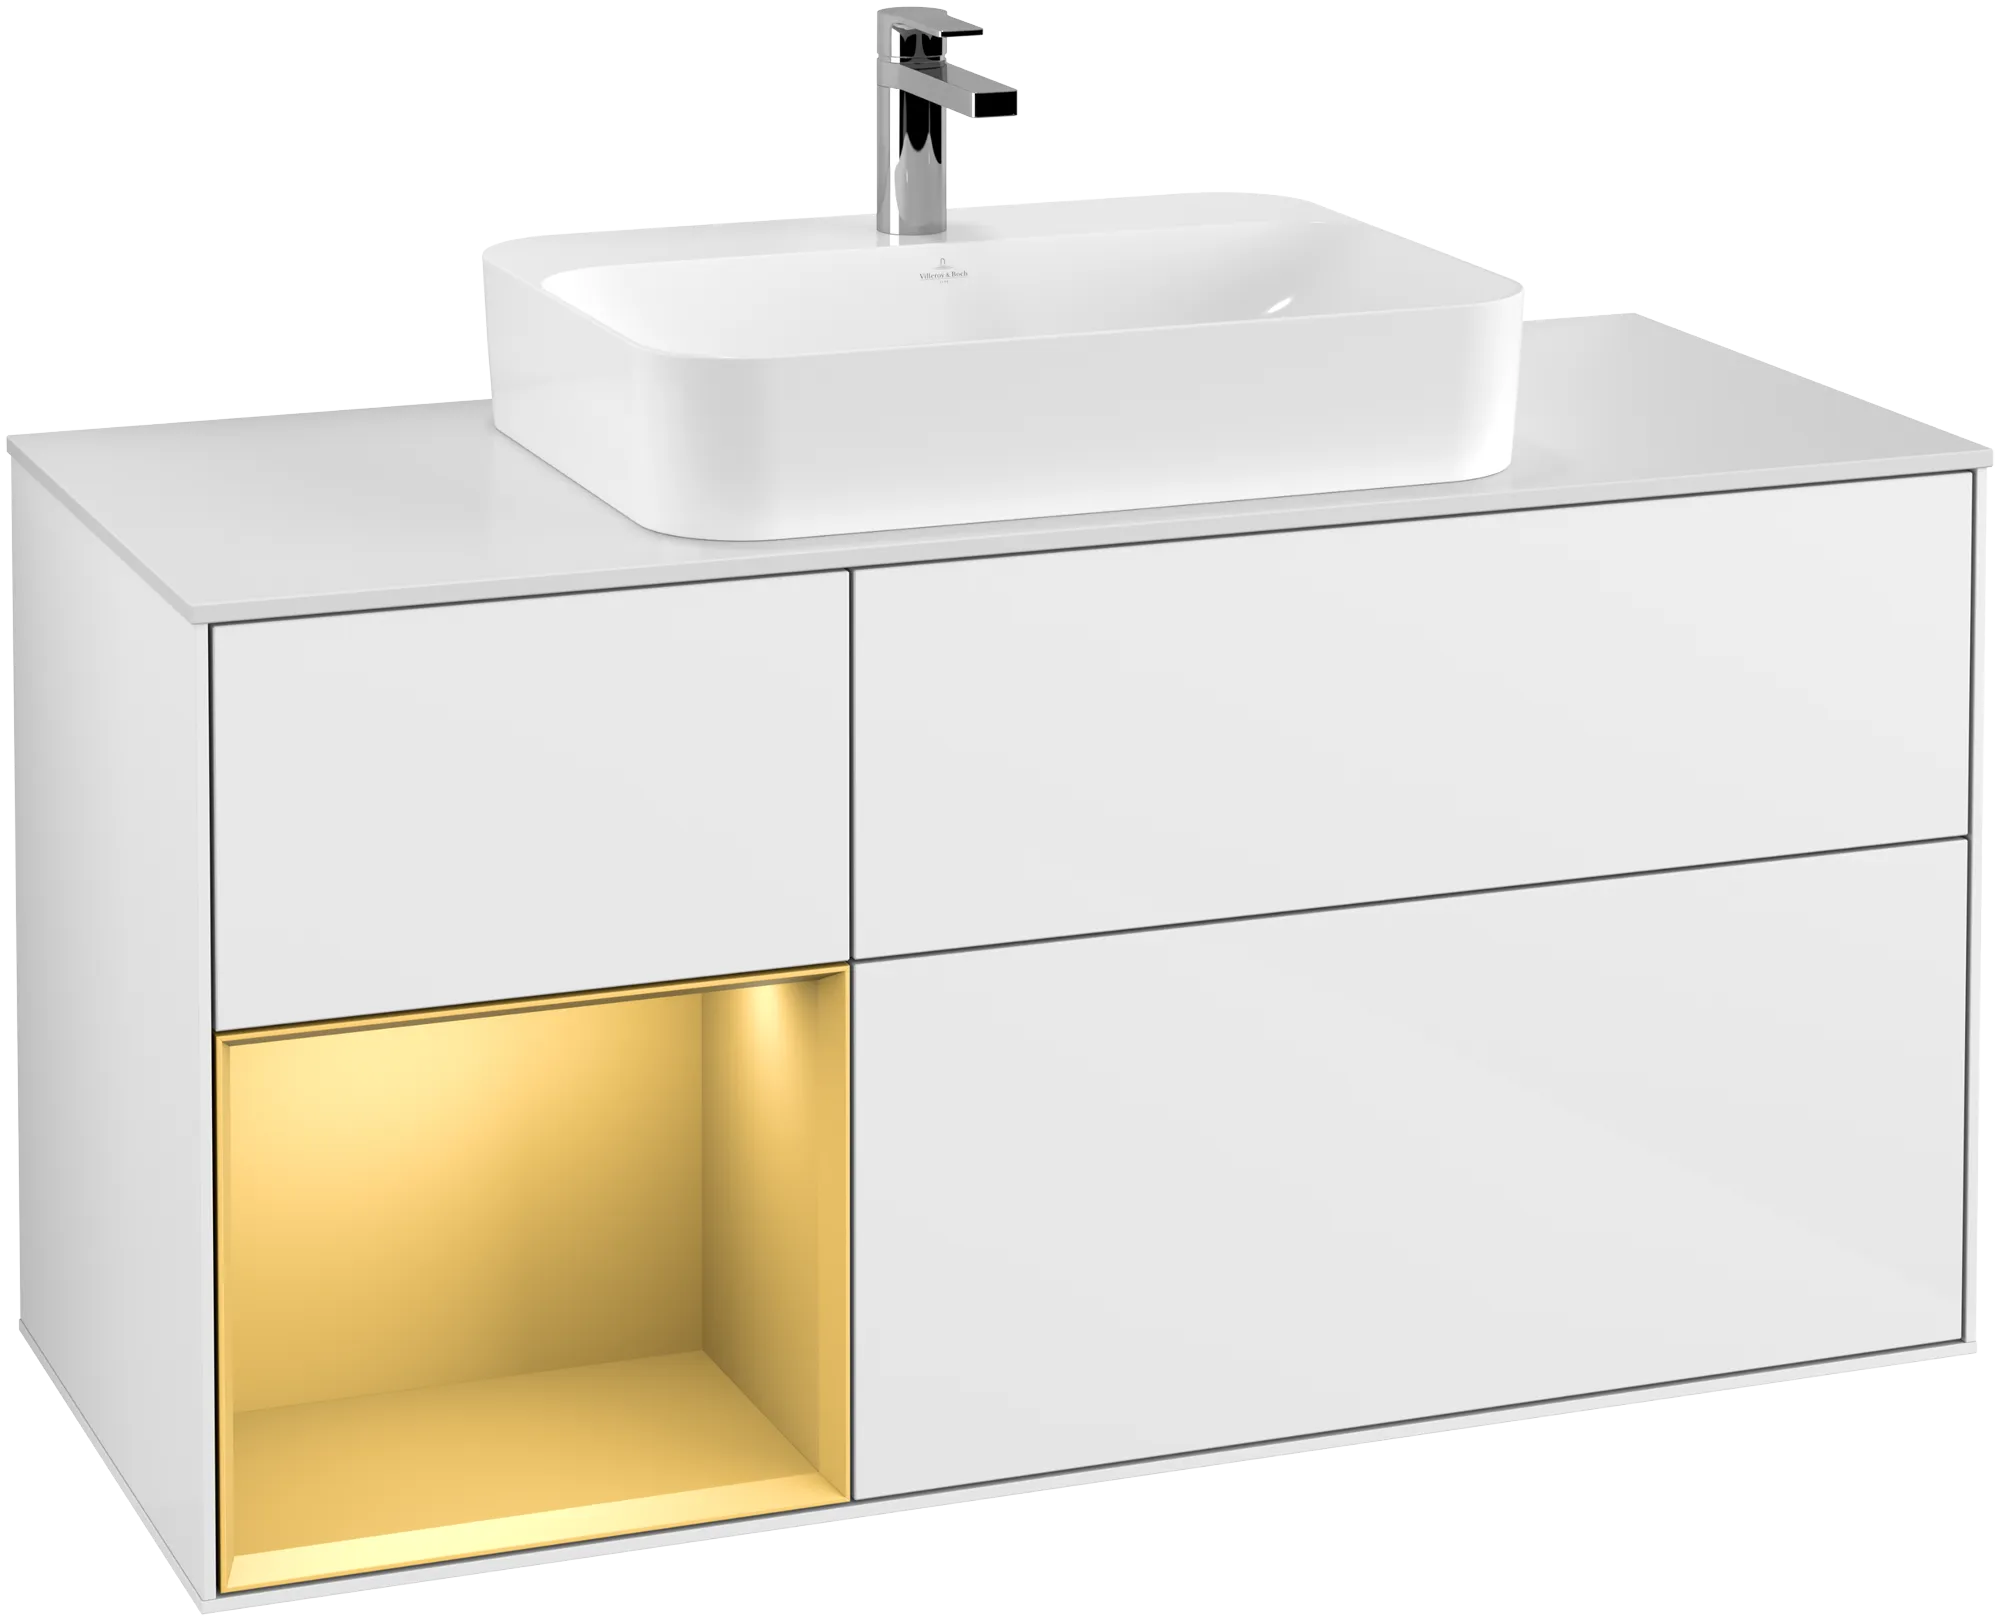 VILLEROY BOCH Finion Vanity unit, with lighting, 3 pull-out compartments, 1200 x 603 x 501 mm, Glossy White Lacquer / Gold Matt Lacquer / Glass White Matt #G411HFGF resmi